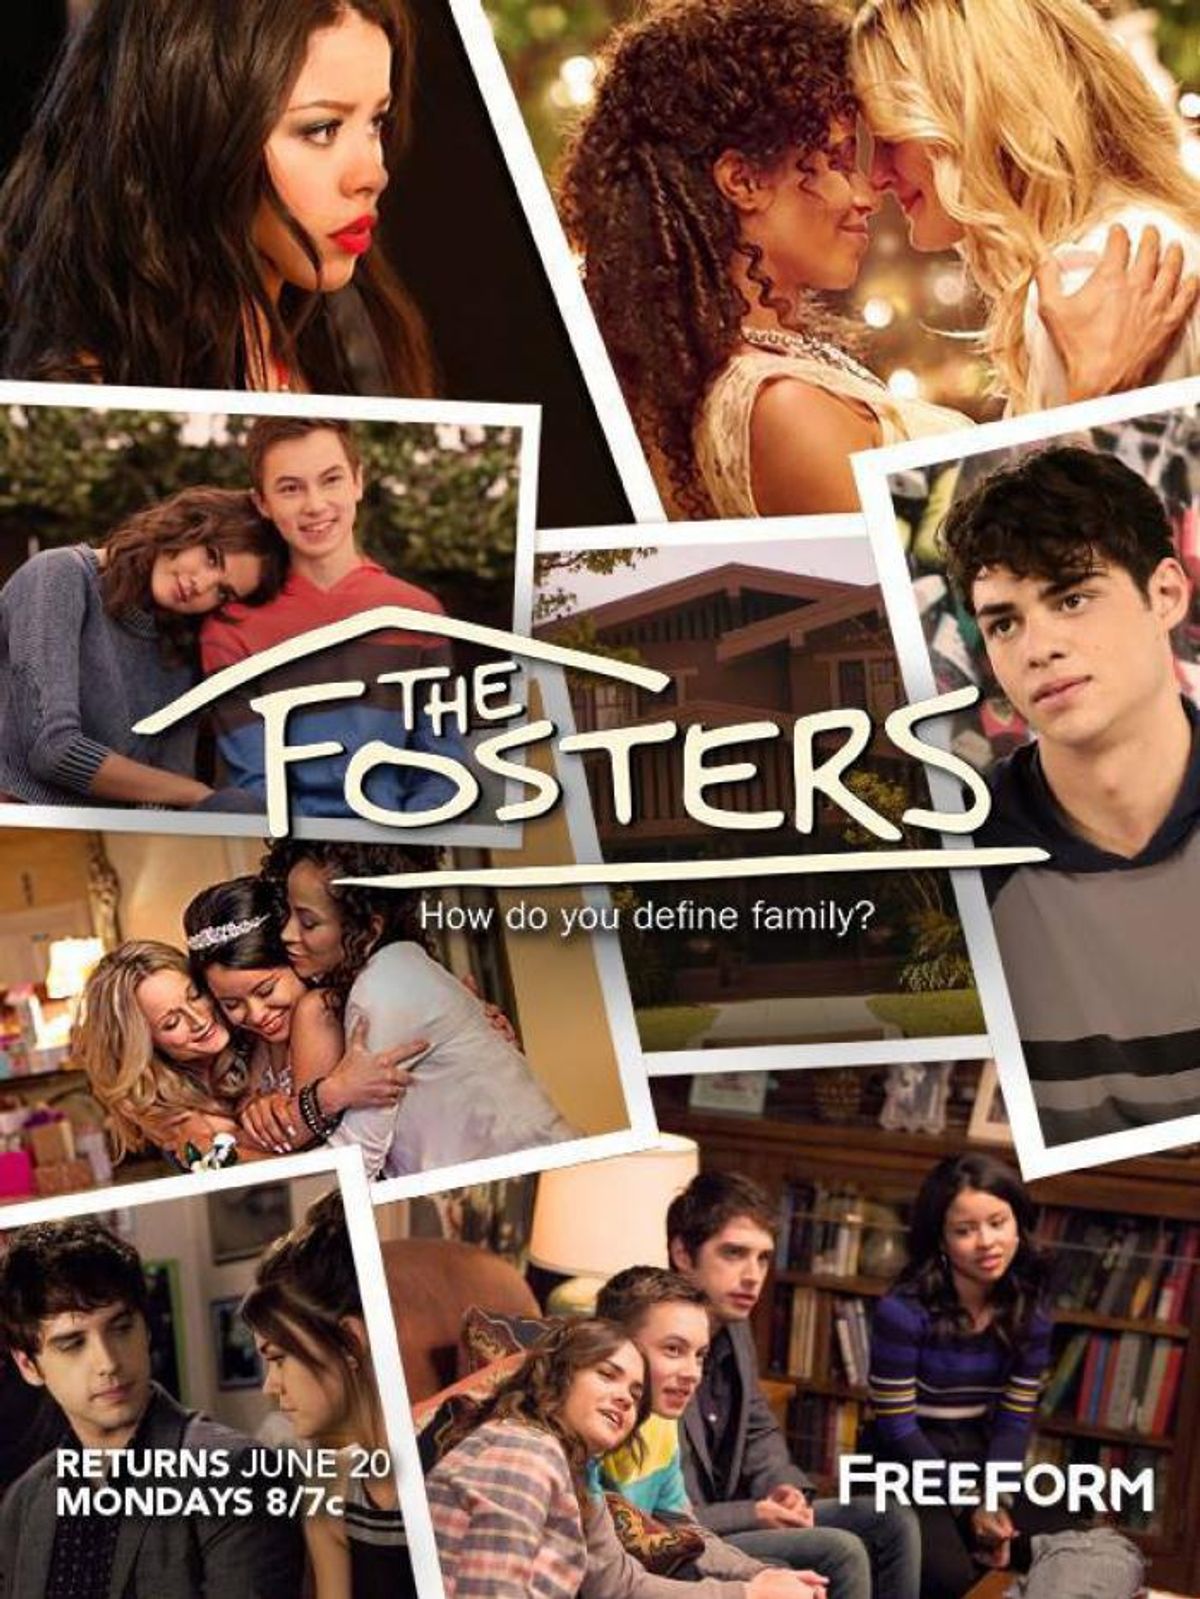 11 Things I Learned From Watching "The Fosters"